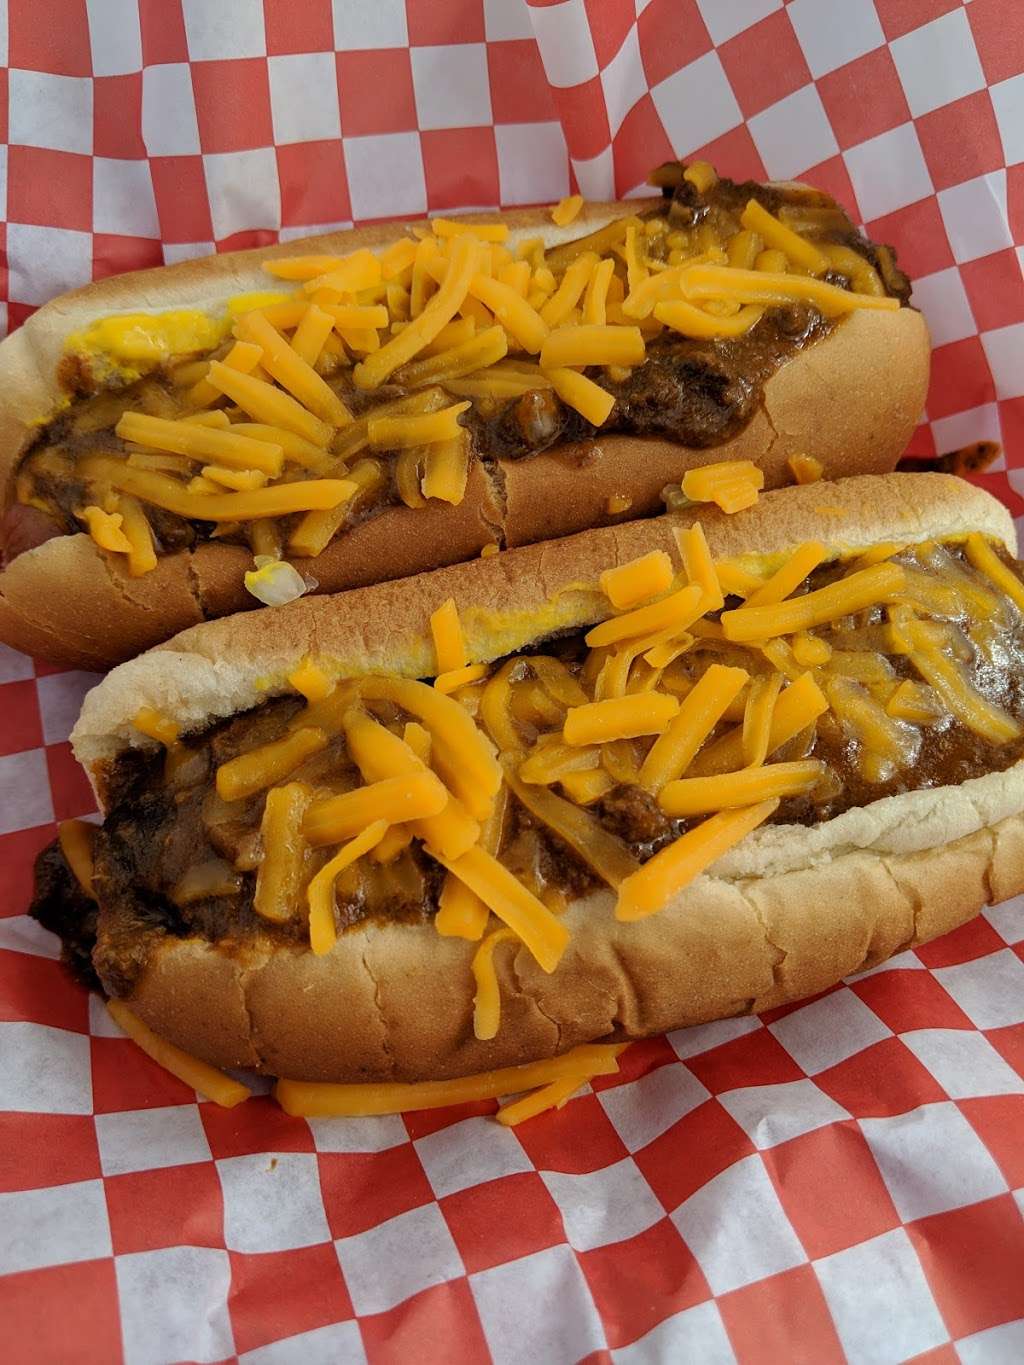 Arts Chili Dog Stand | 1410 W Florence Ave, Los Angeles, CA 90047 | Phone: (323) 750-1313